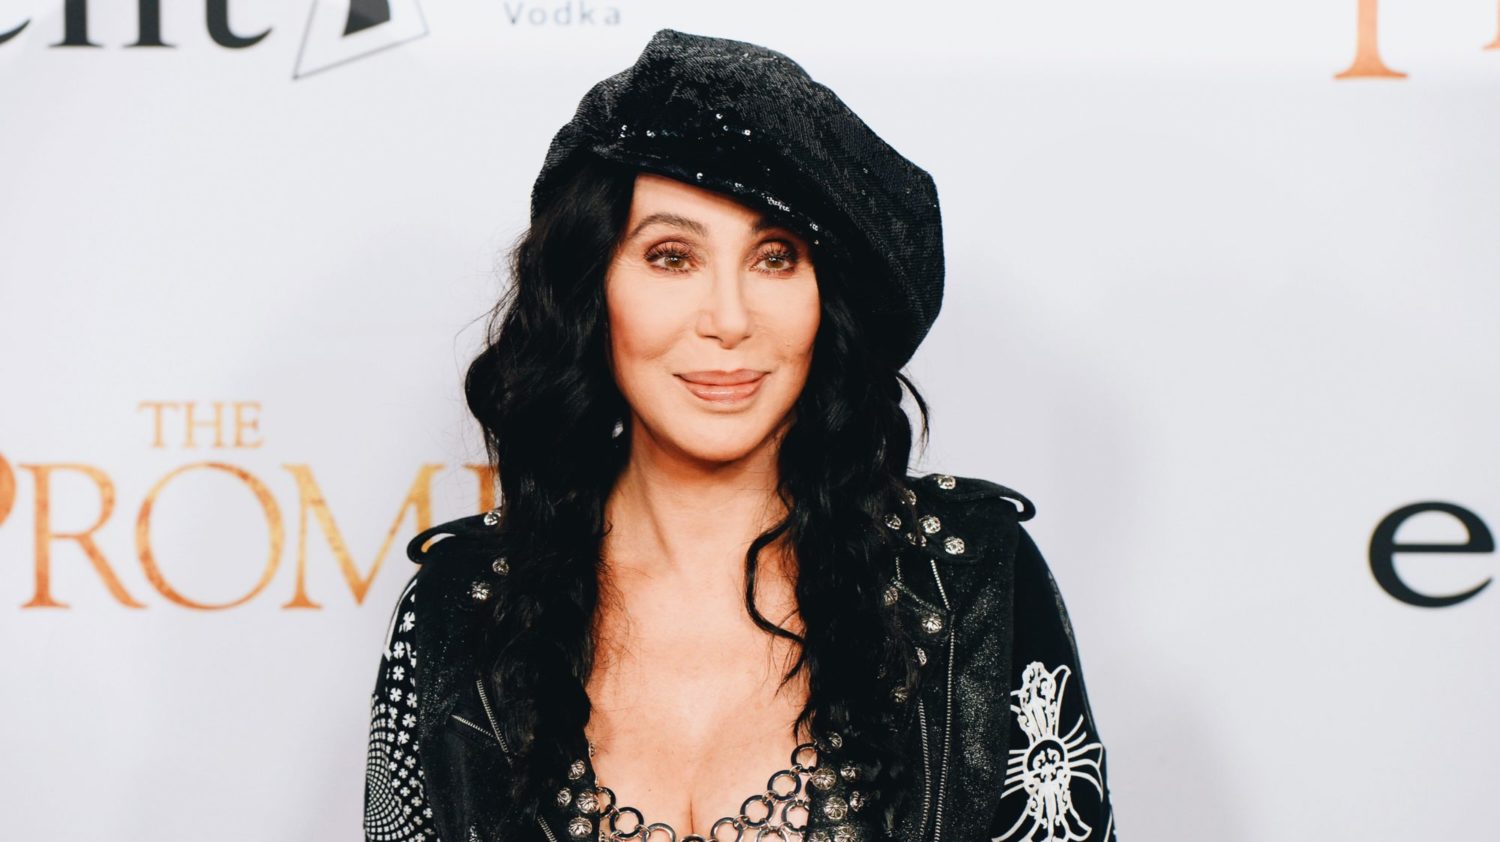 Image of pop singer Cher, who helped to free the "world's loneliest elephant."